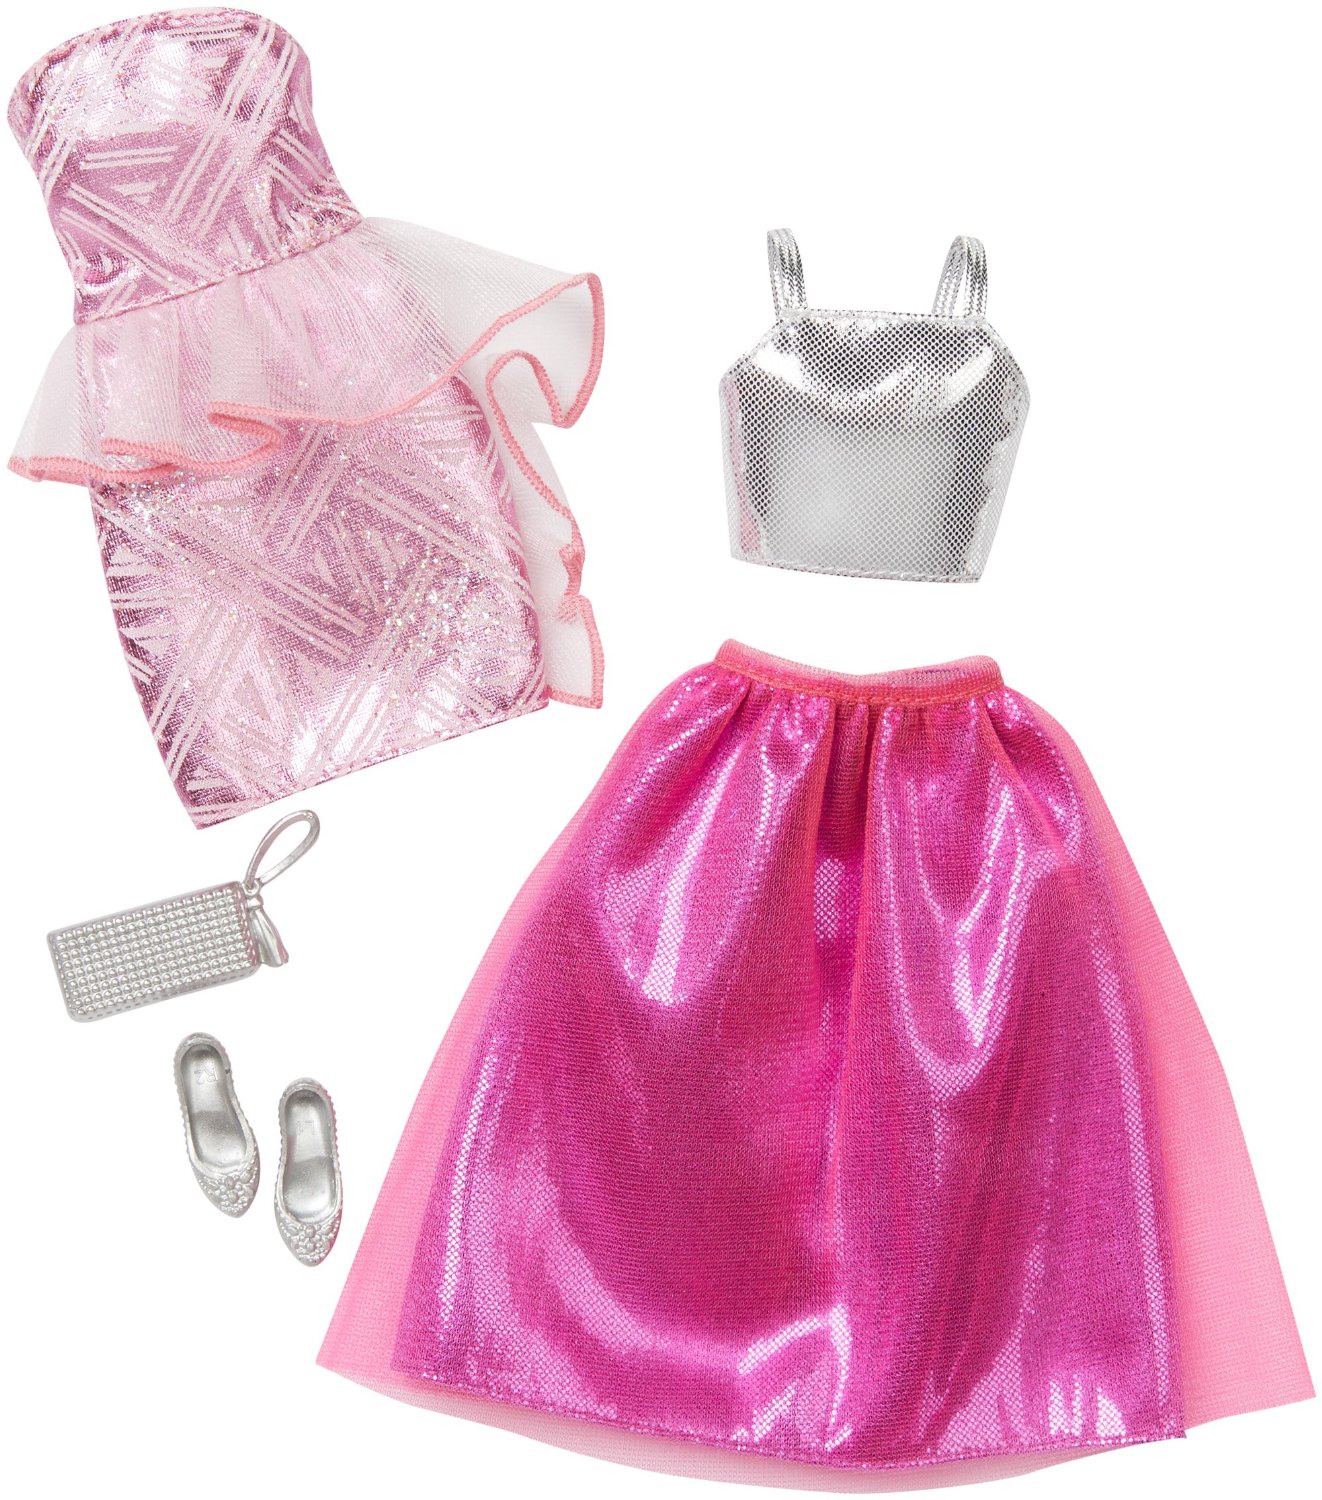 Barbie Fashion 2 Pack Fancy - Pink & Silver Dresses for $8.25